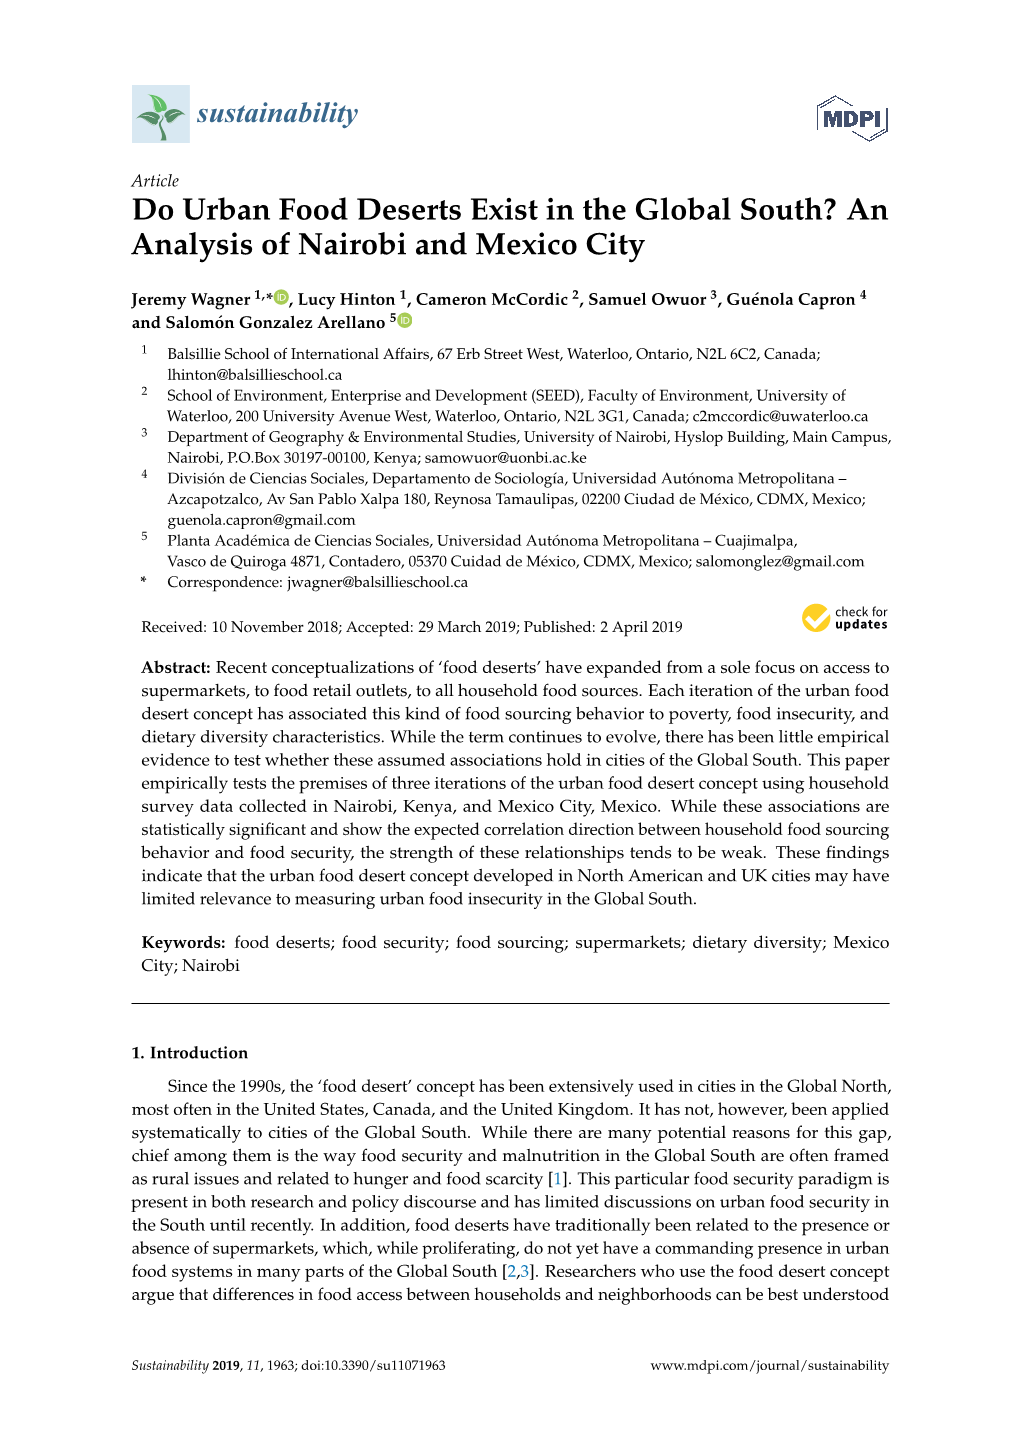 Do Urban Food Deserts Exist in the Global South? an Analysis of Nairobi and Mexico City